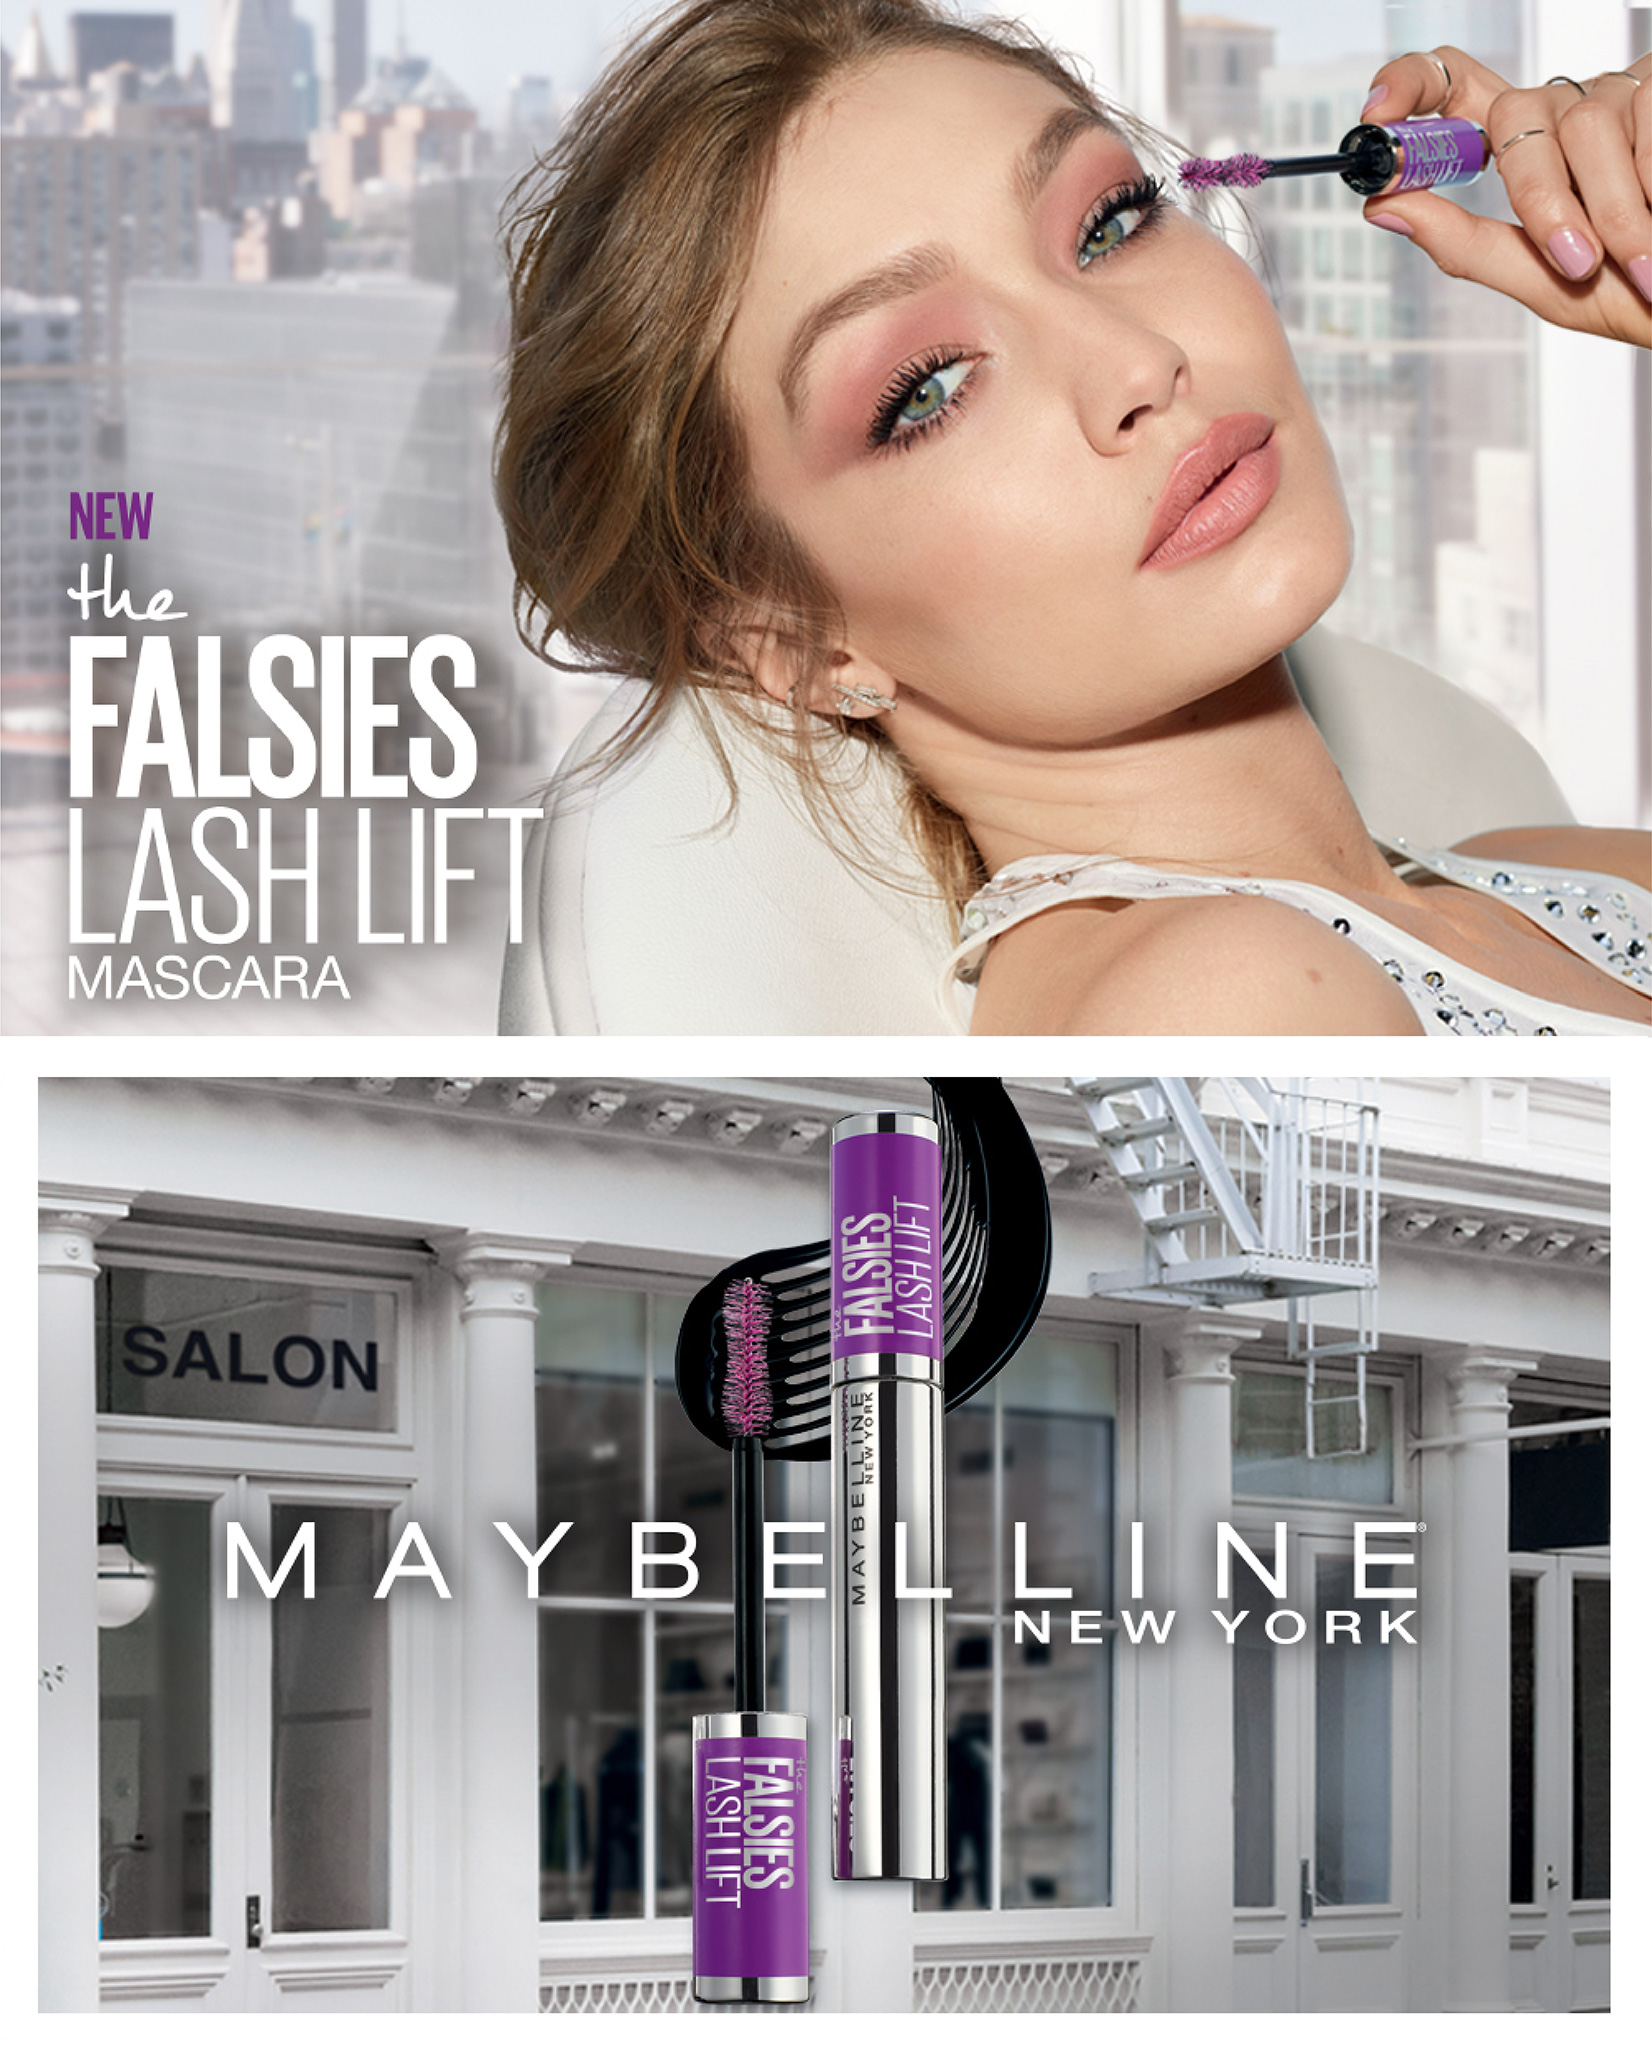 lift Eye lash Maybelline review philippines - Falsies : by mascara